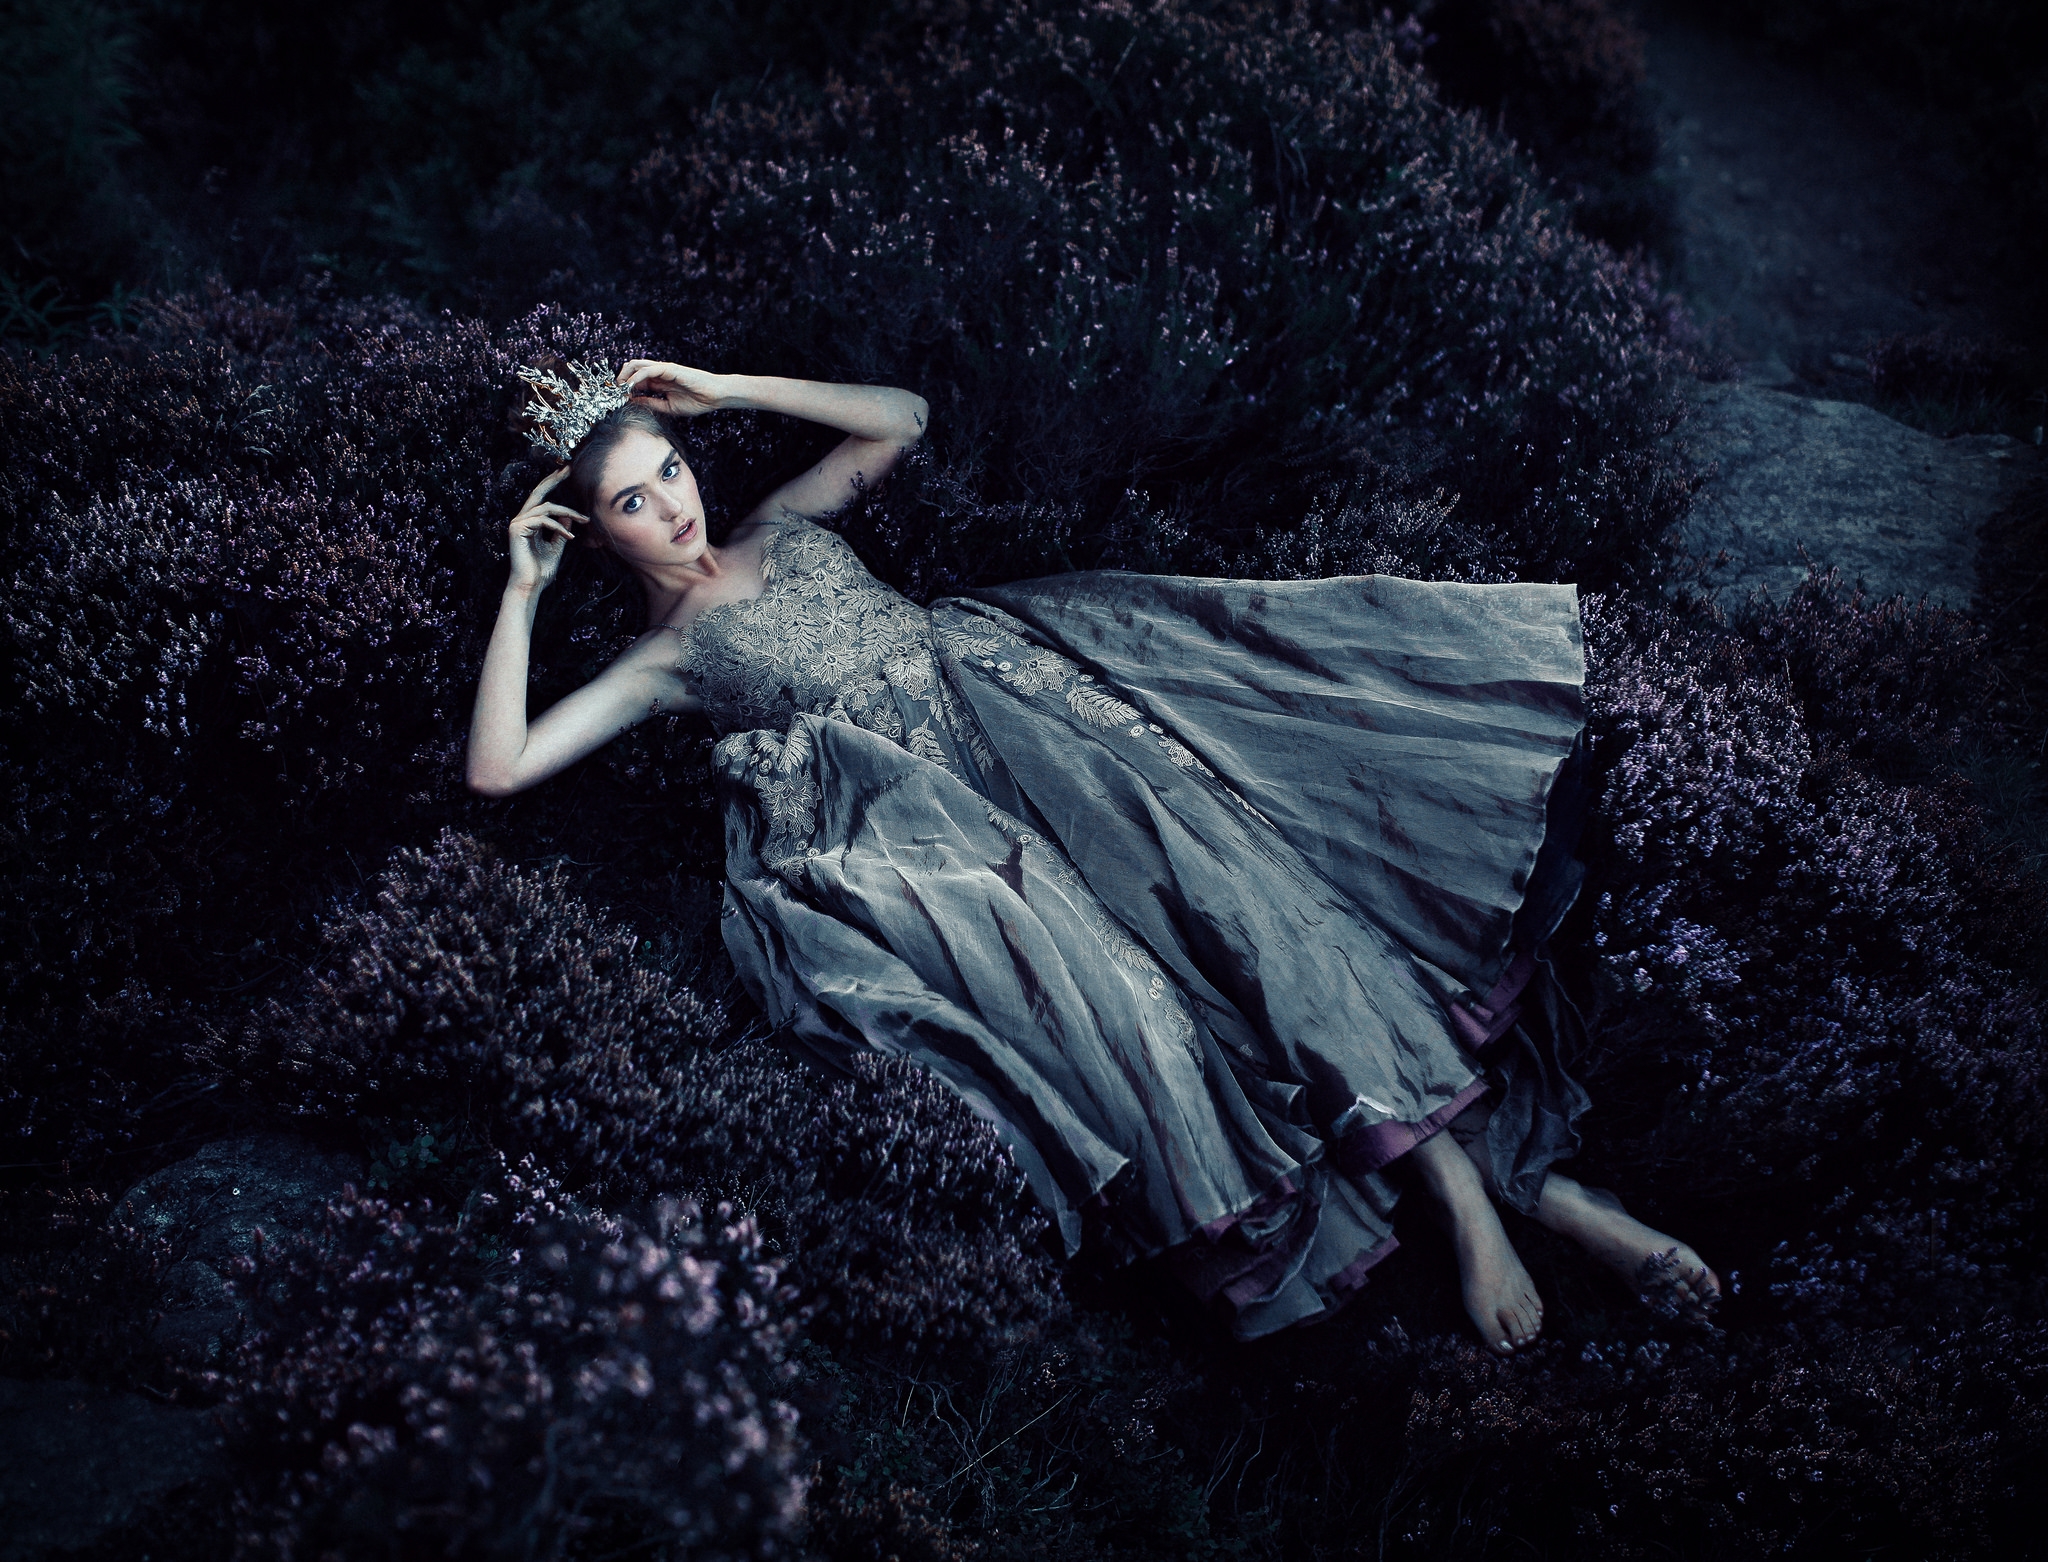 A girl in a dress lying on a bed of flowers